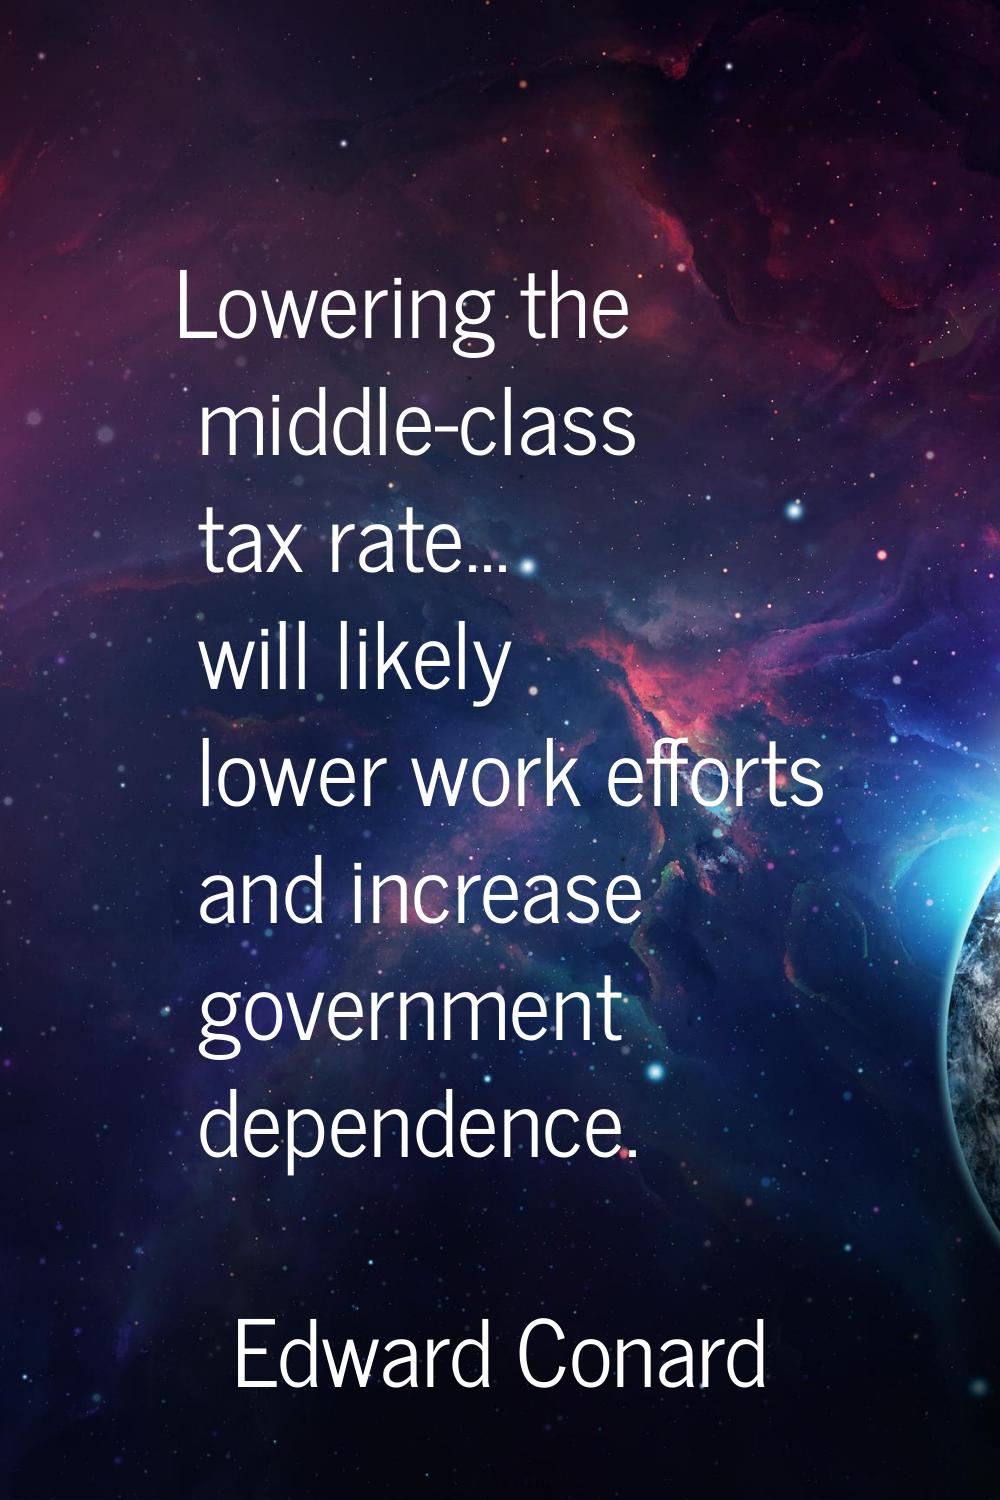 Lowering the middle-class tax rate... will likely lower work efforts and increase government depend